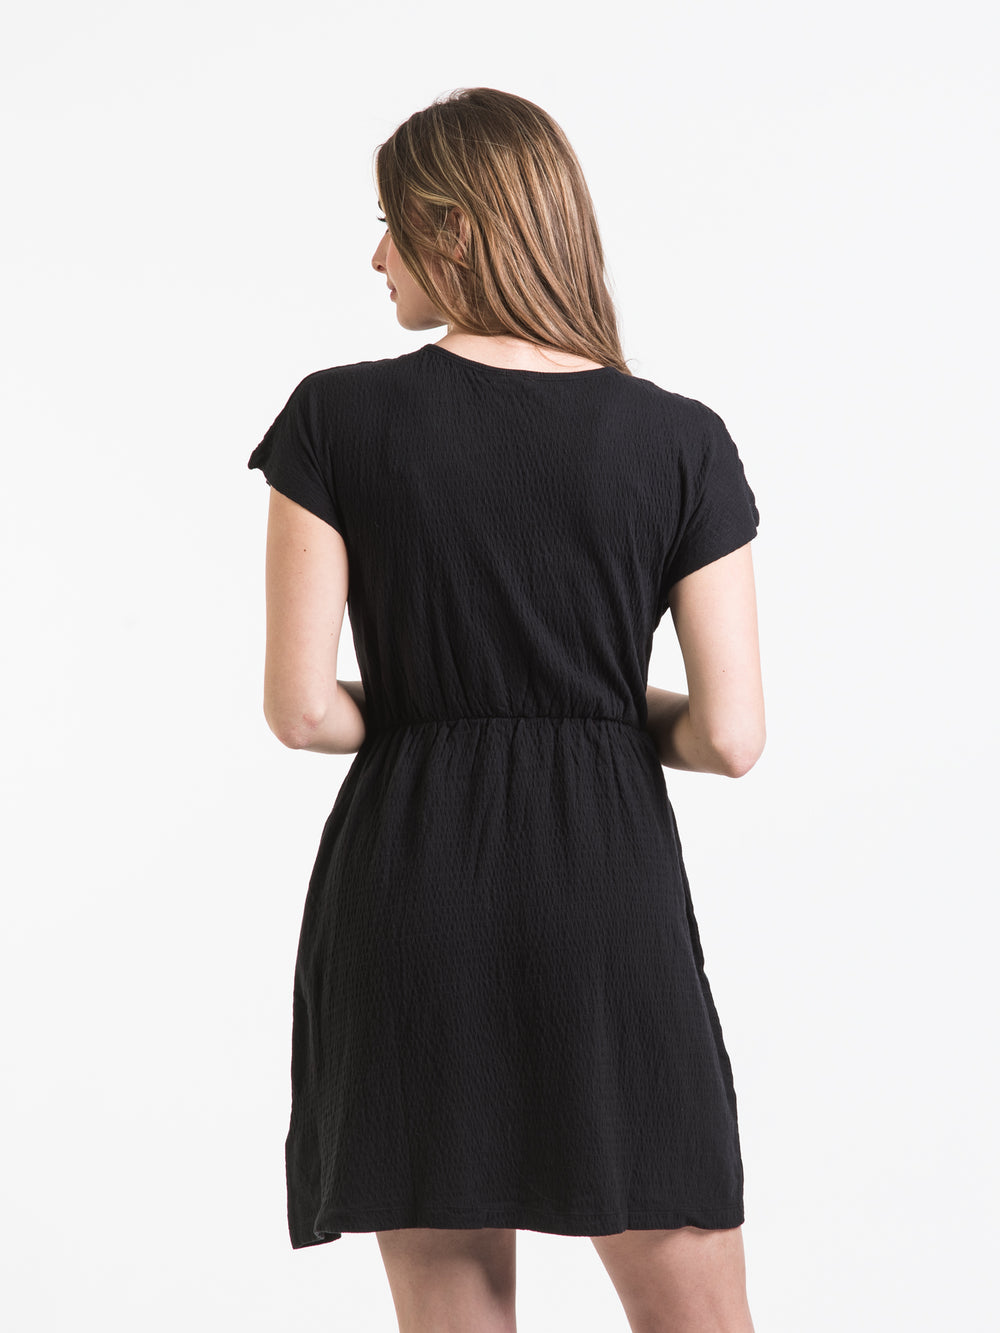 ROXY SIMPLE THOUGHTS DRESS - CLEARANCE